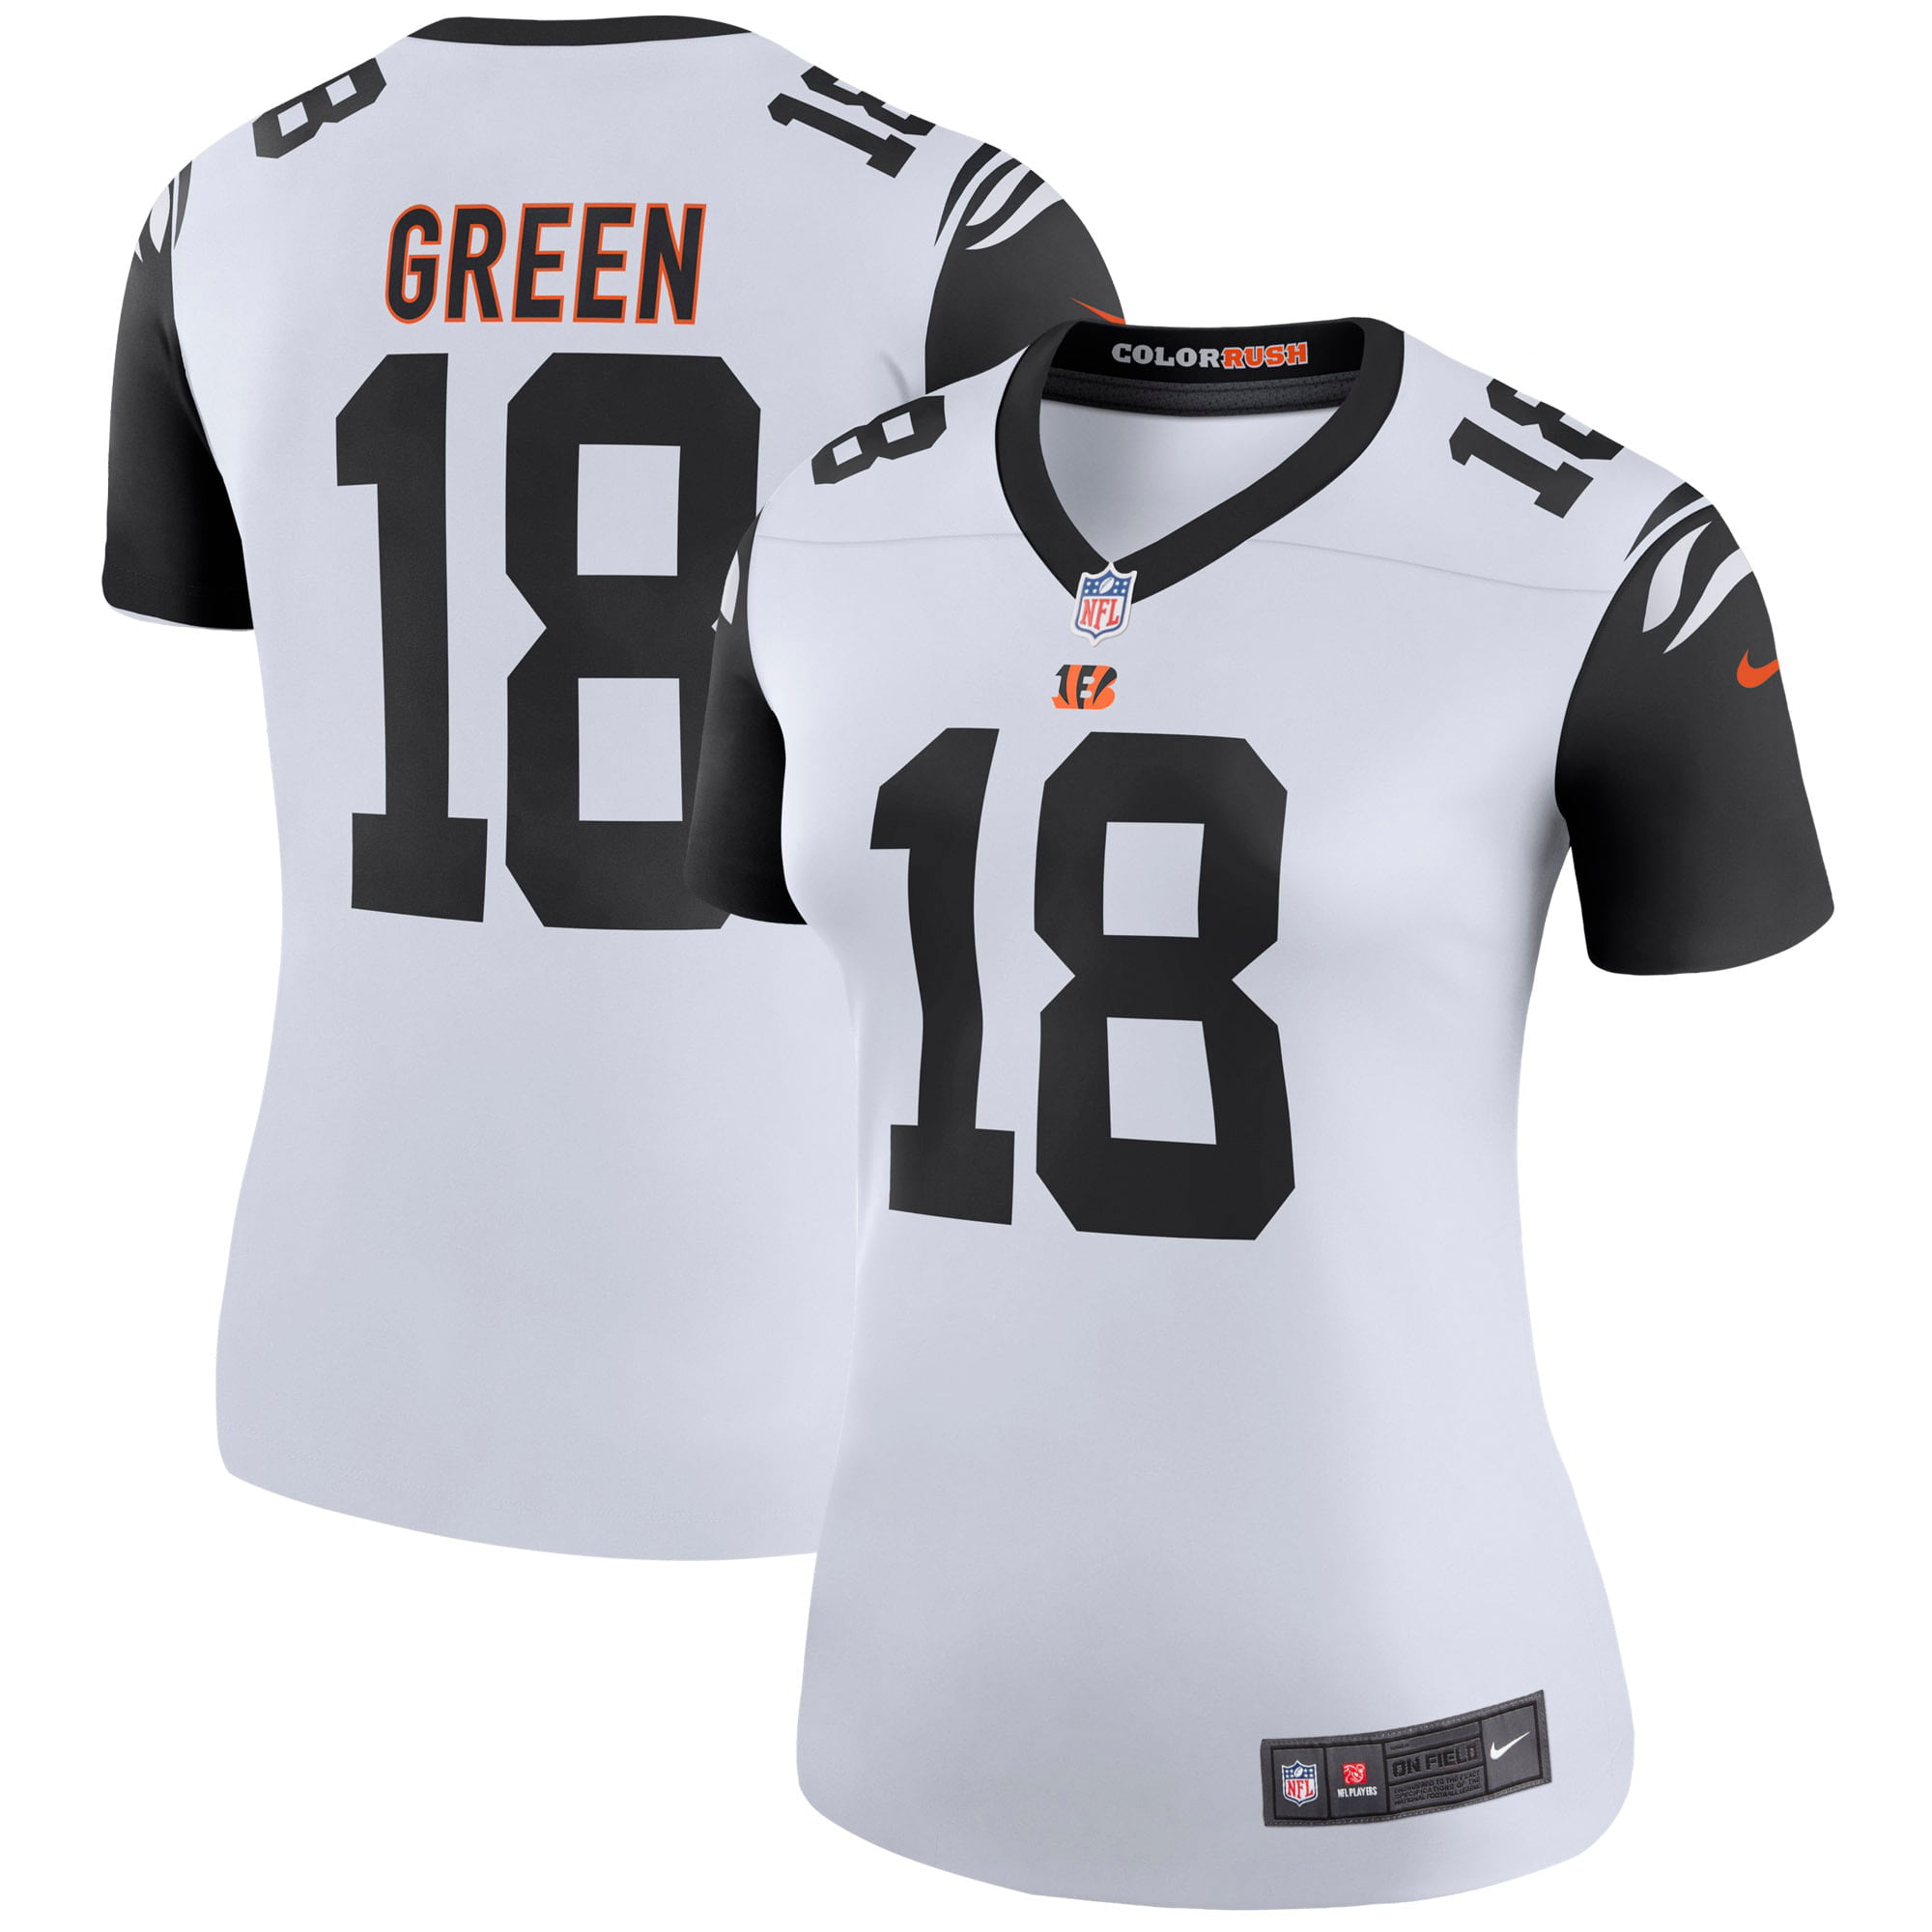 bengals white color rush jersey